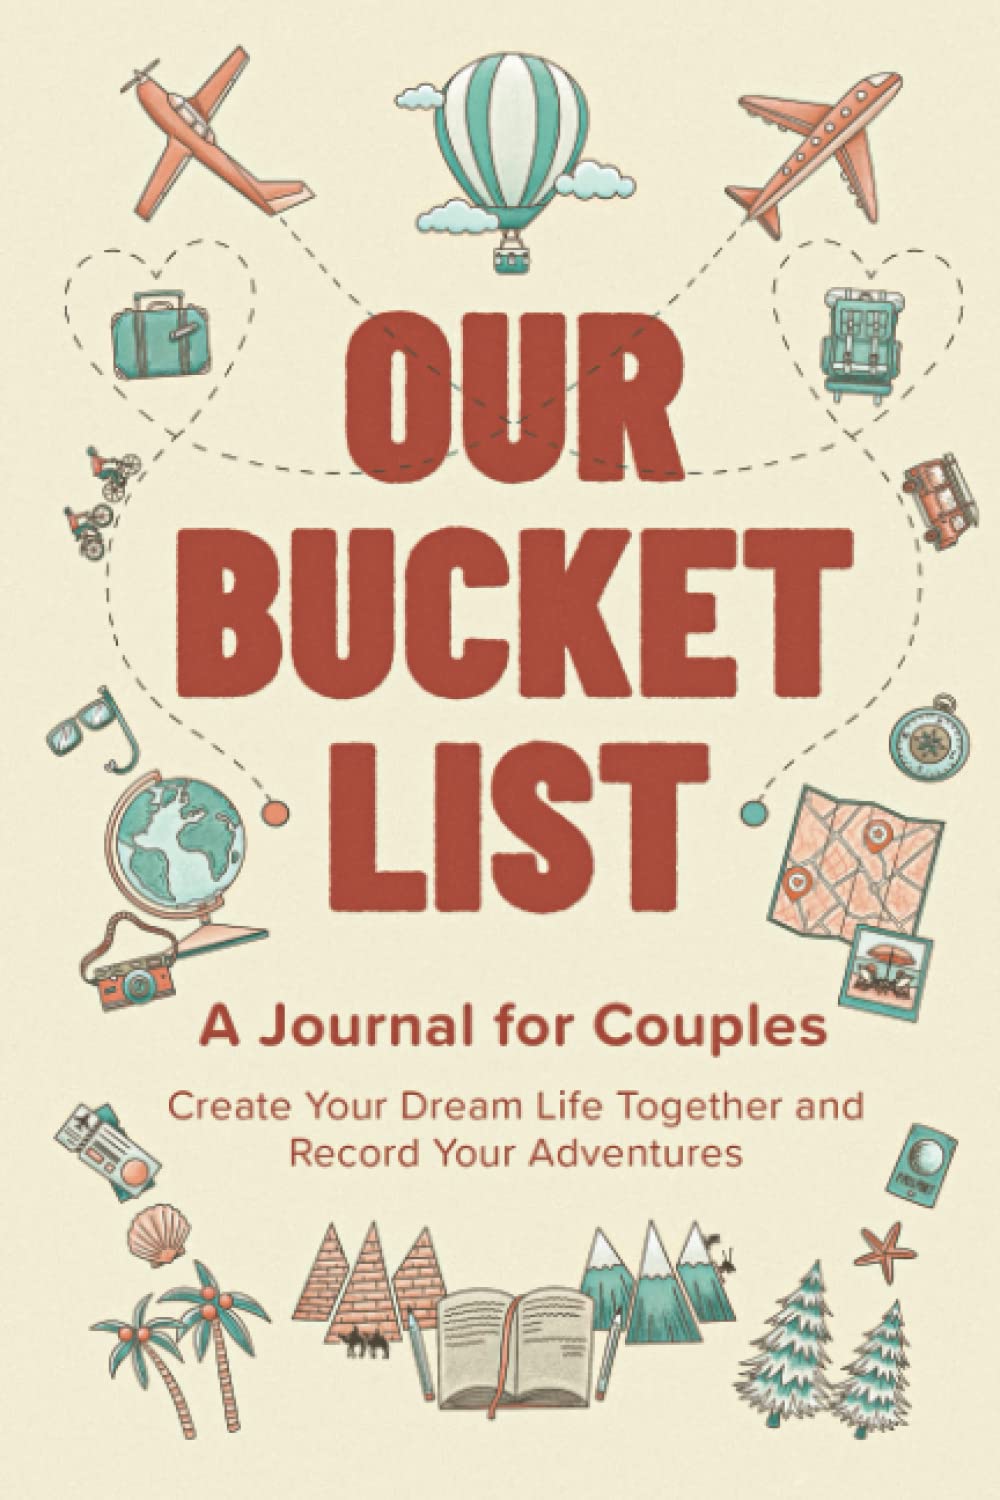 Our Bucket List: A Journal for Couples: Create Your Dream Life Together and Record Your Adventures - honeymoon gift ideas for newlyweds - The Wedding Club